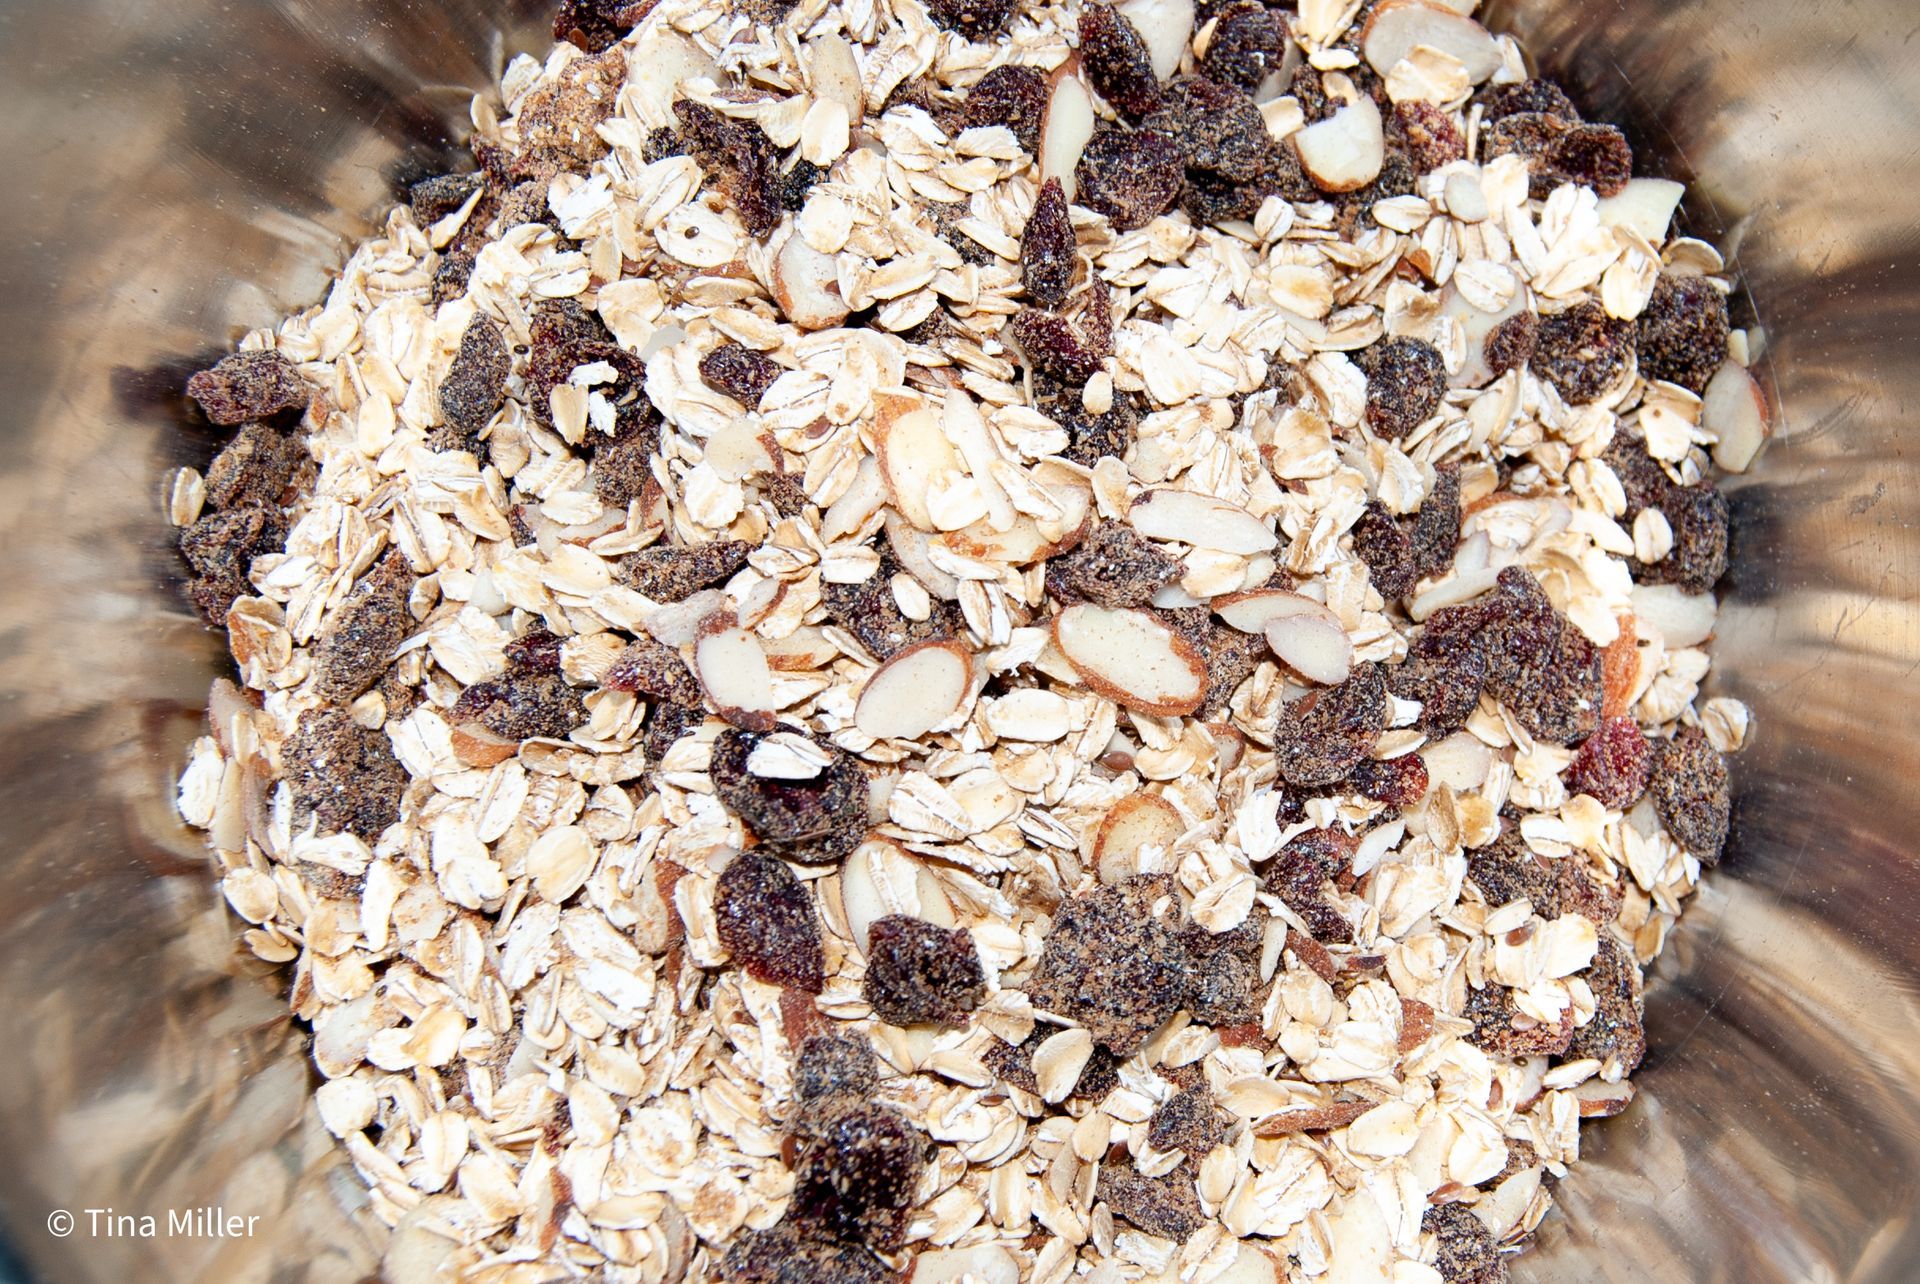 Dry old fashion oats mixed with dried cranberries in a large bowl.